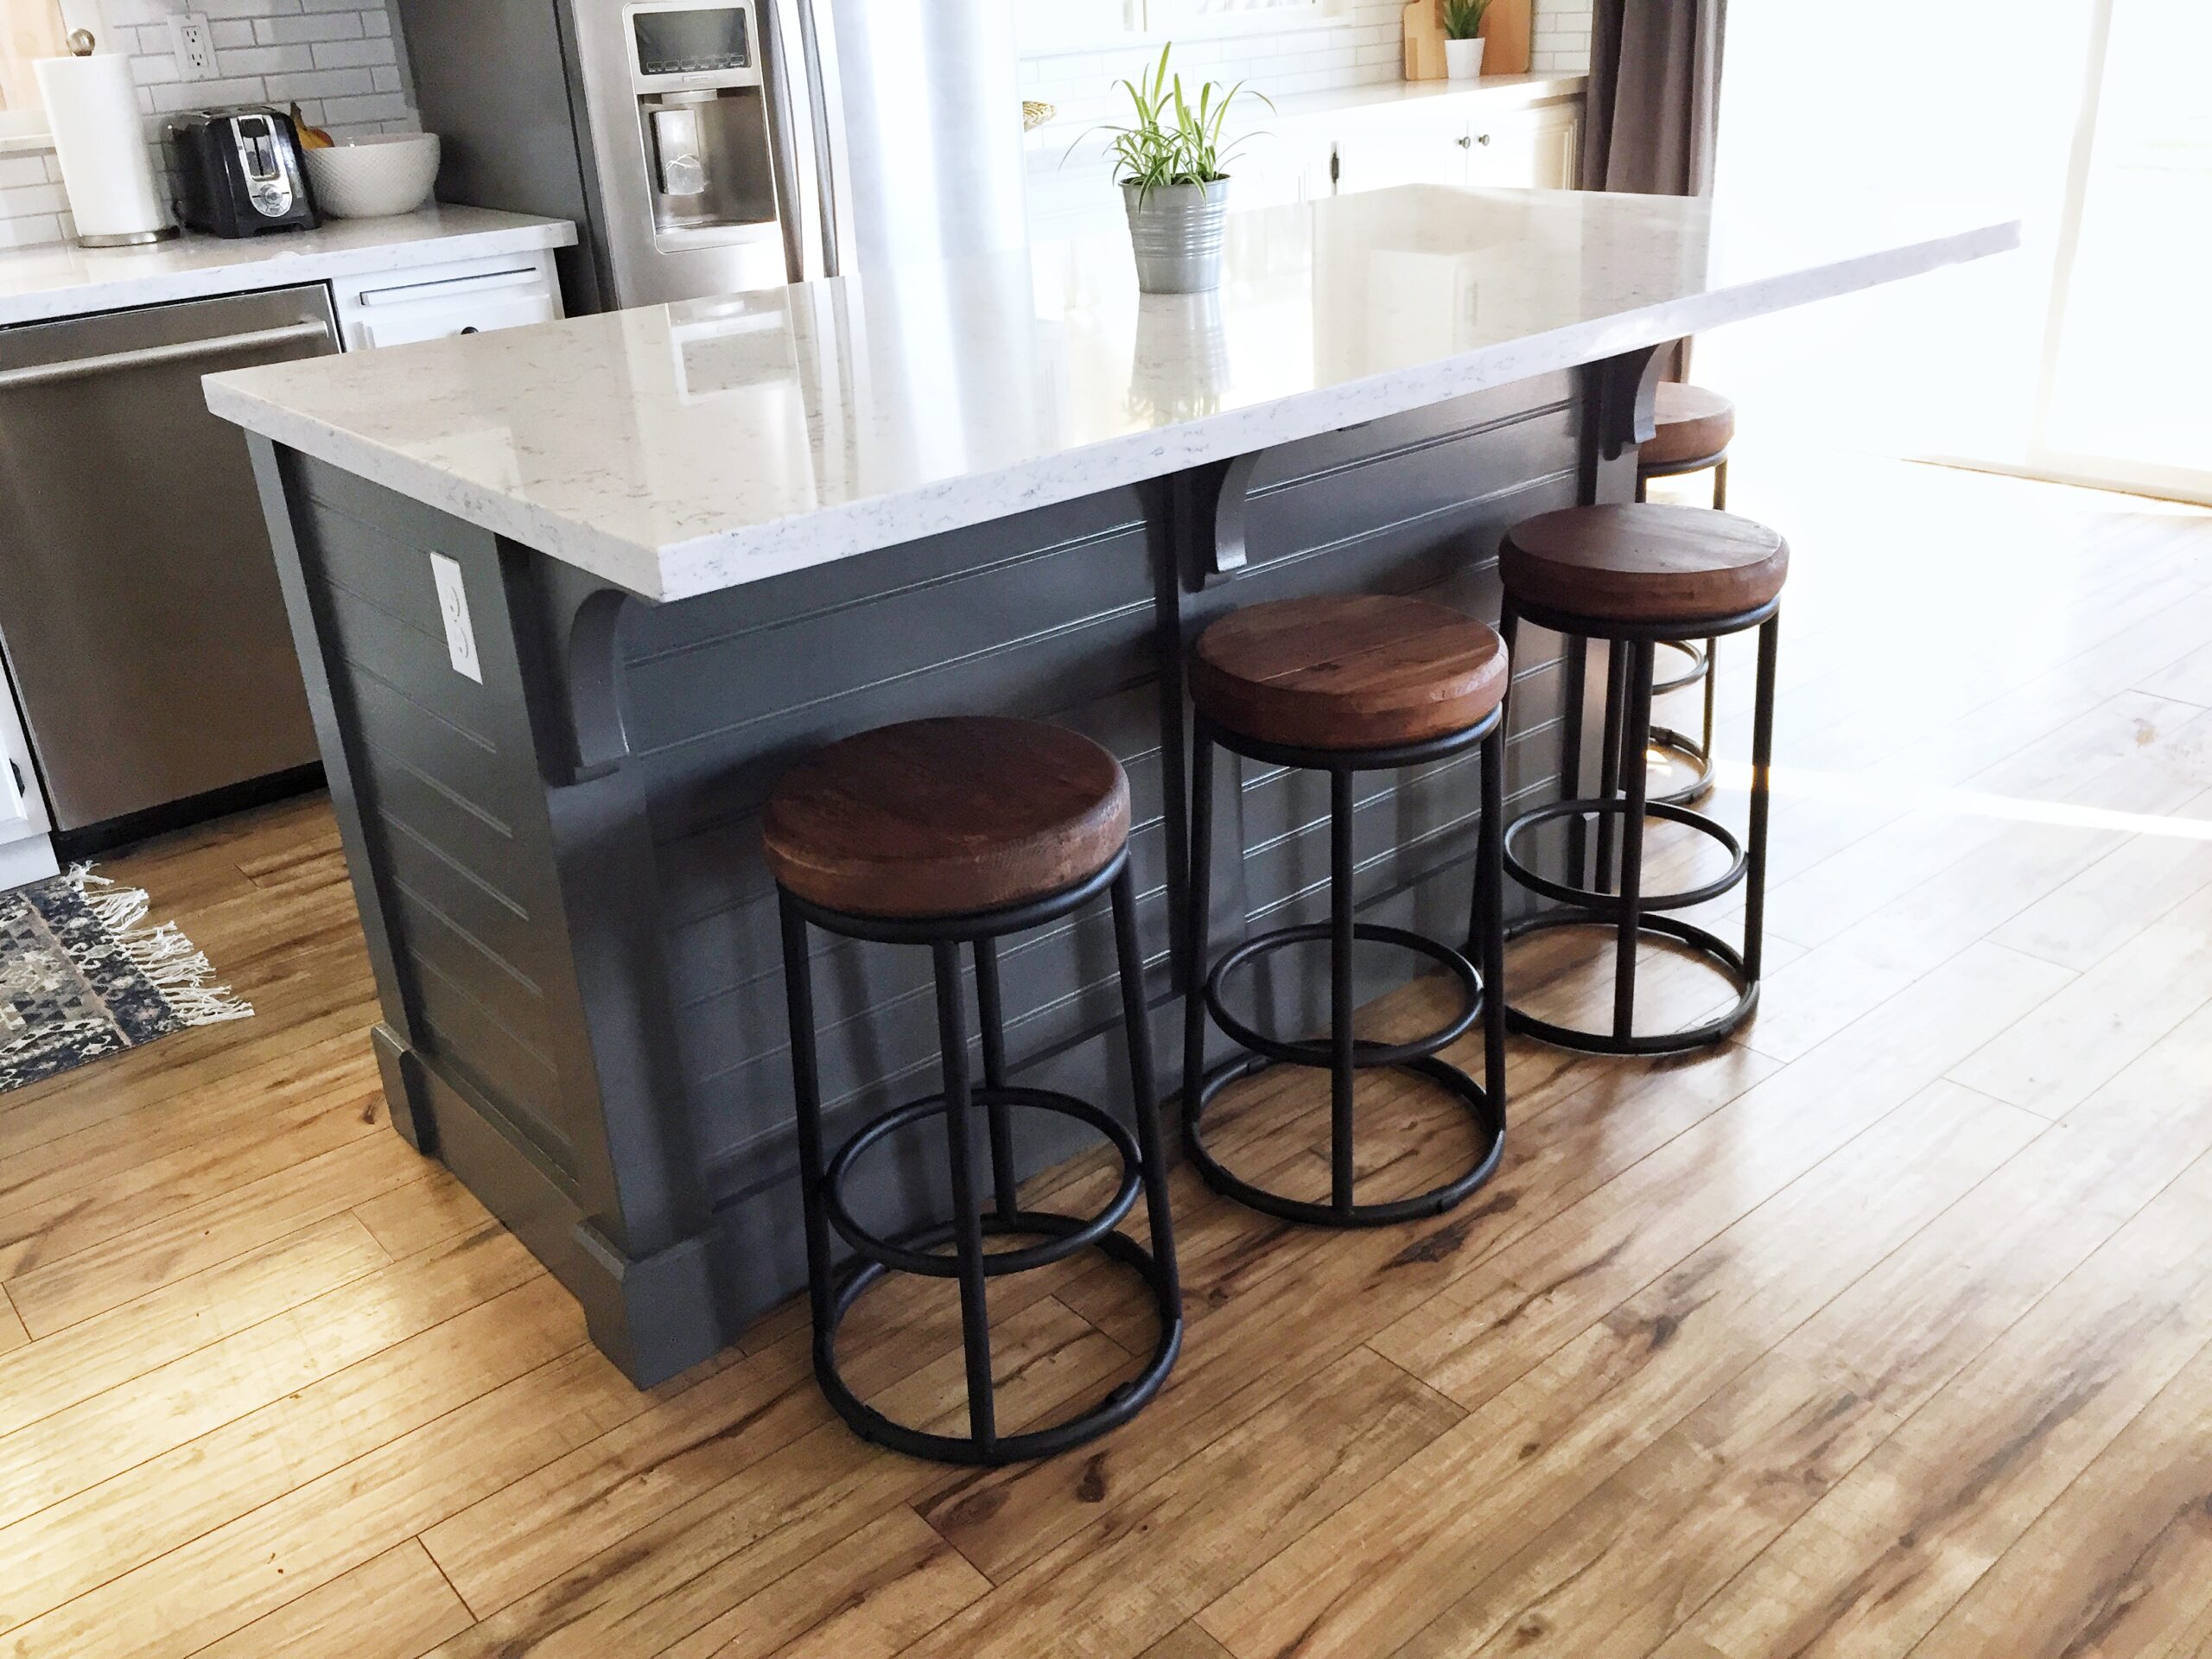 A Diy Kitchen Island Make It Yourself, Kitchen Island With Cabinets On Both Sides